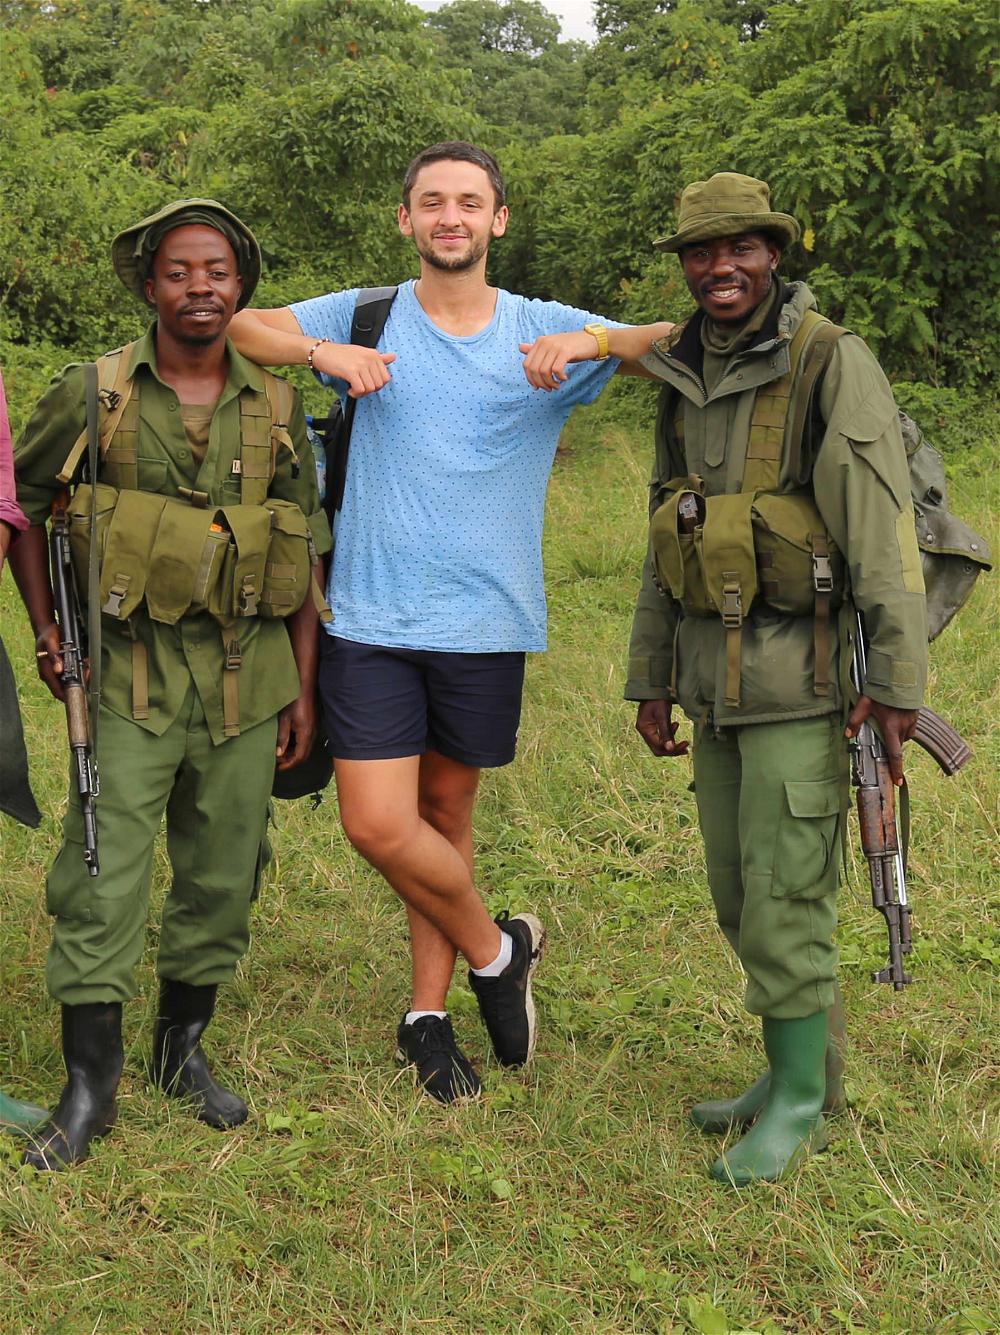 Daniel with some potential new friends in the Democratic Republic of the Congo